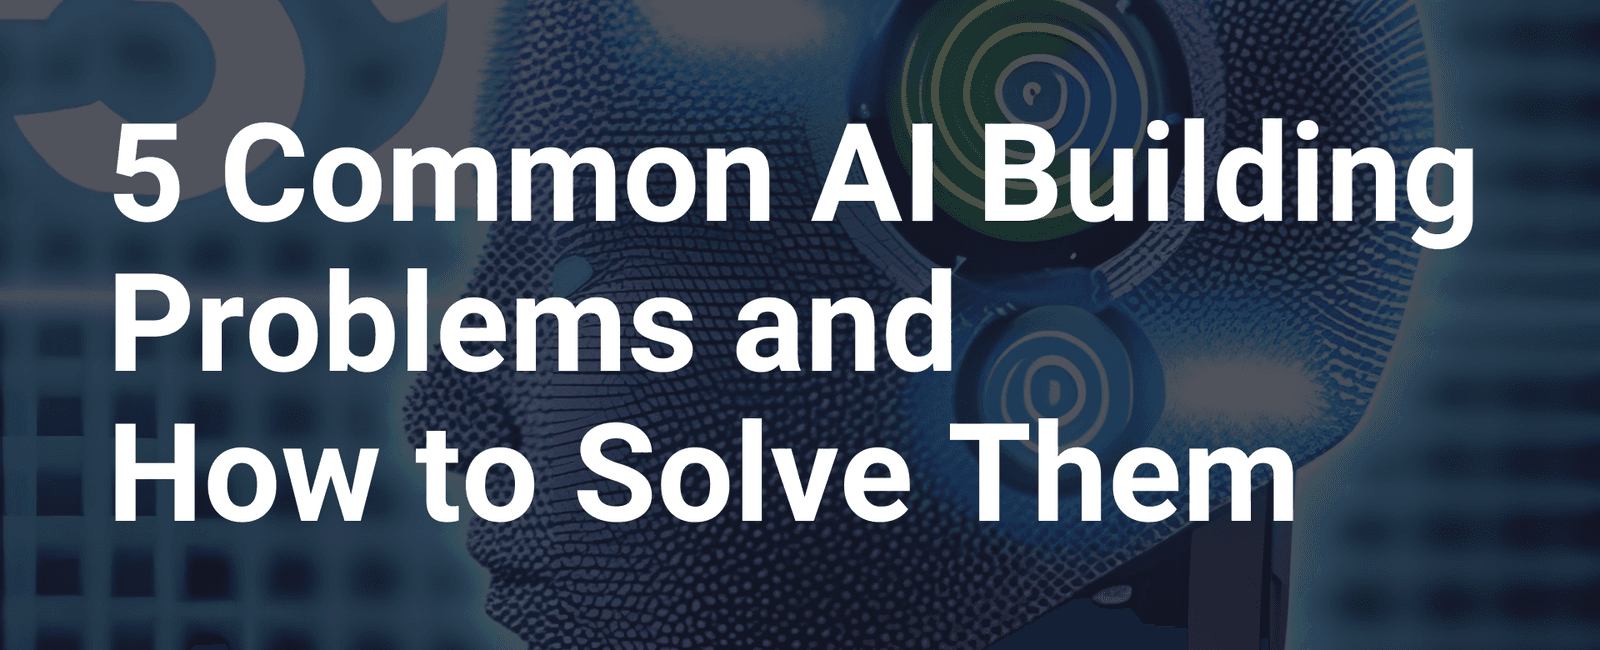 5 Common AI Building Problems and How to Solve Them